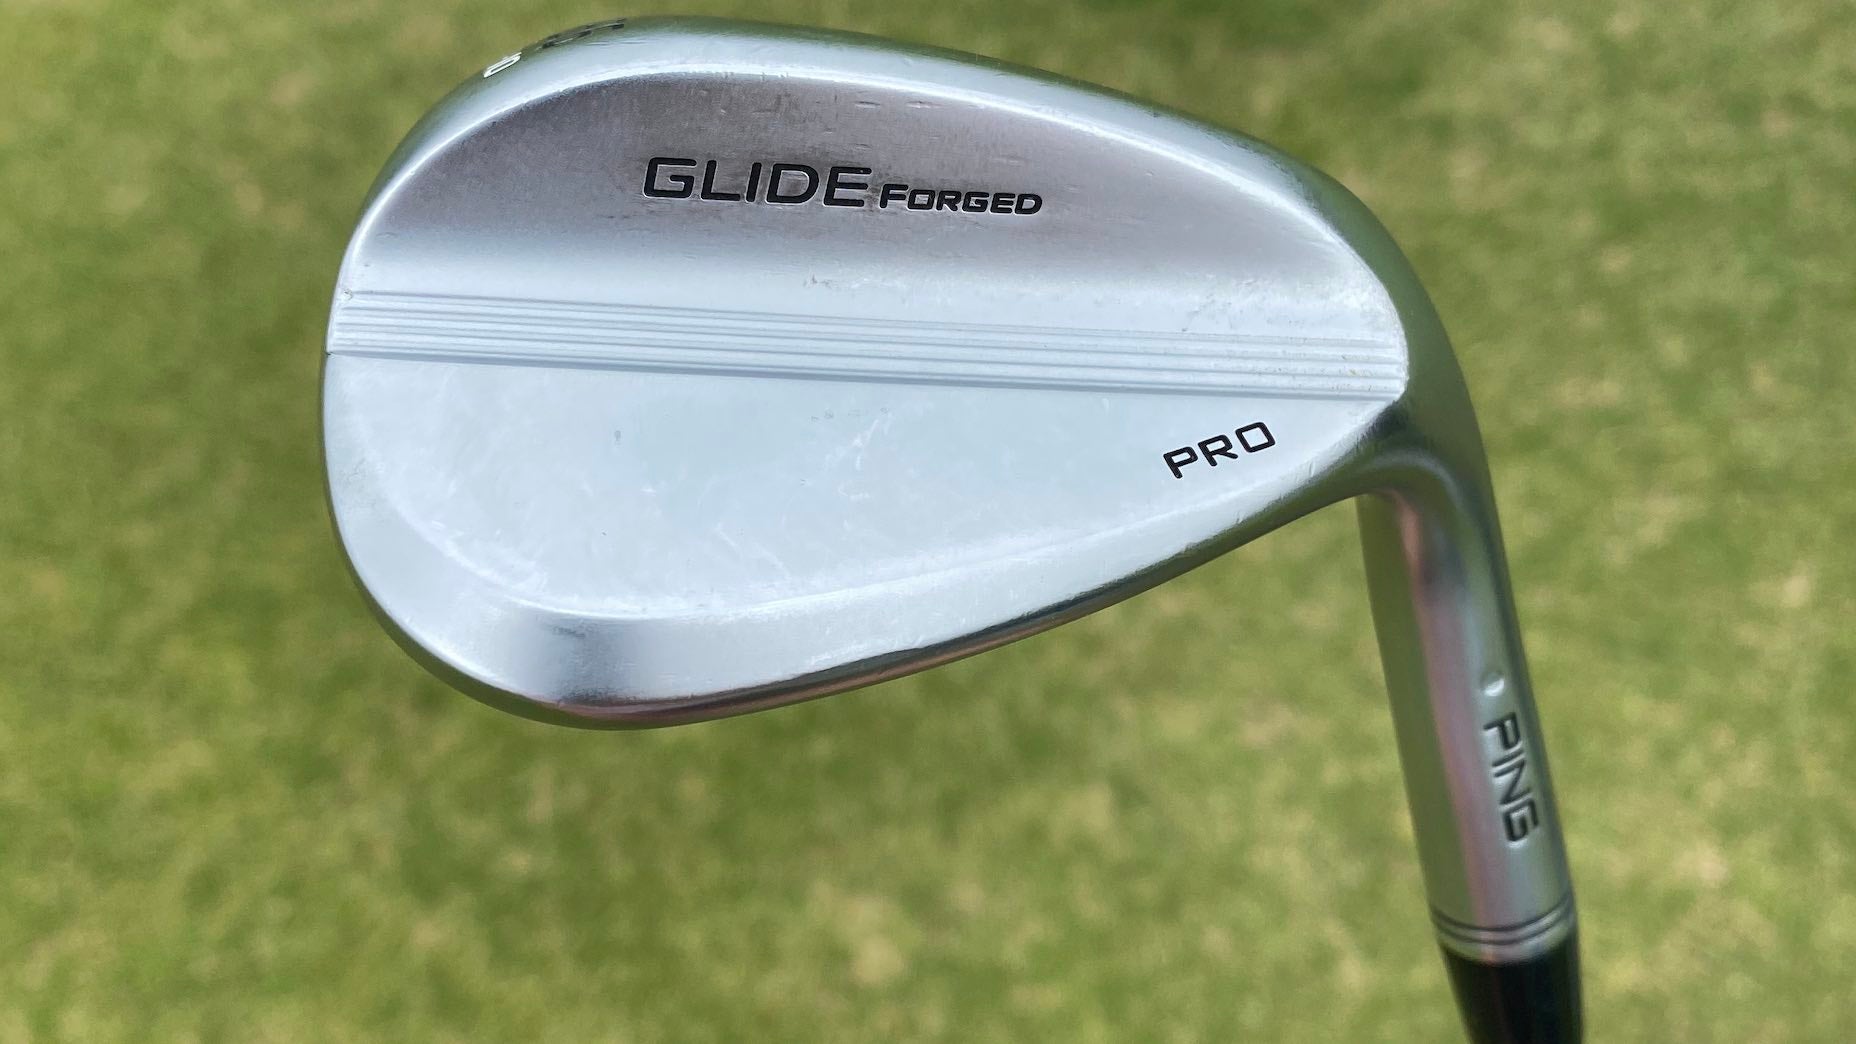 Ping's Glide Forged Pro wedge offers a multitude of options: First